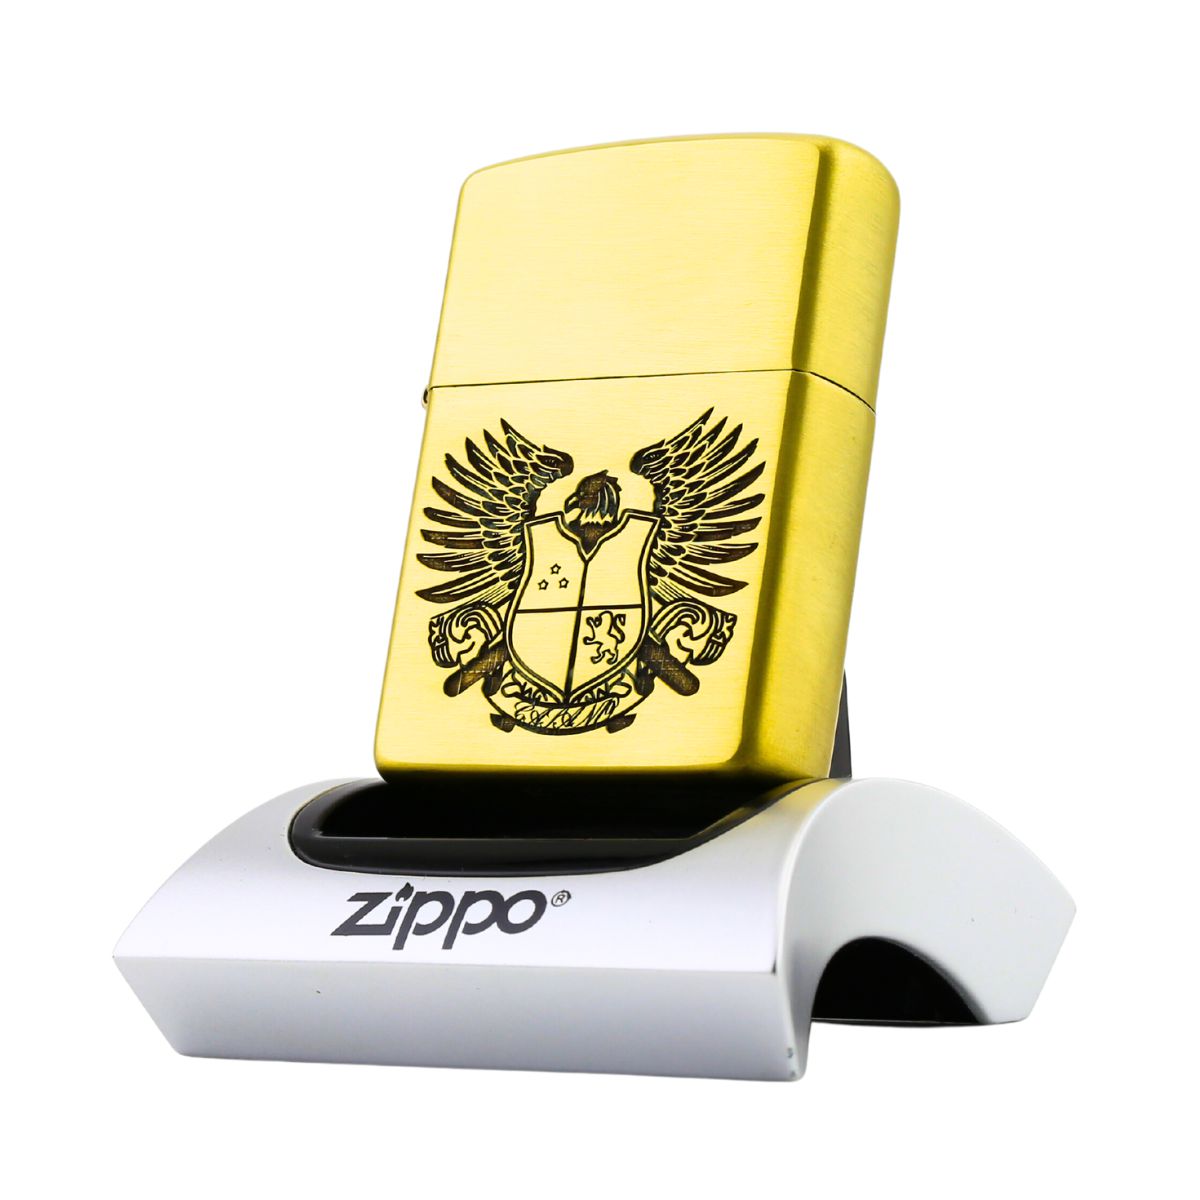  Zippo-Vincenzo-dong-khoi-vo-day-cao-cap